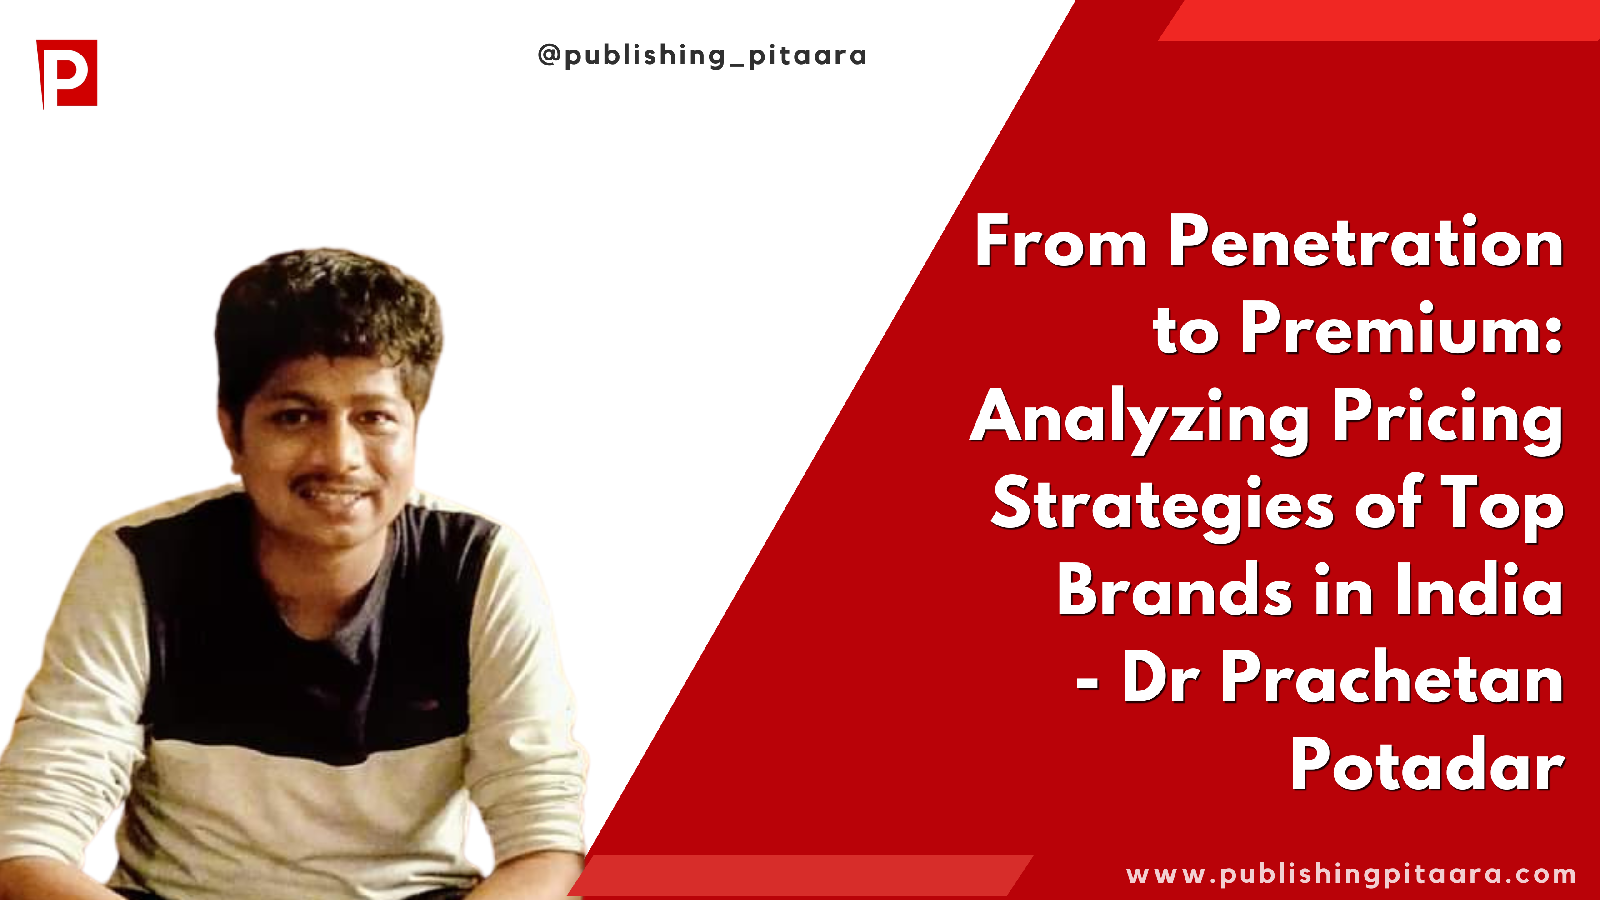 From Penetration to Premium: Analyzing Pricing Strategies of Top Brands in India - Dr Prachetan Potadar